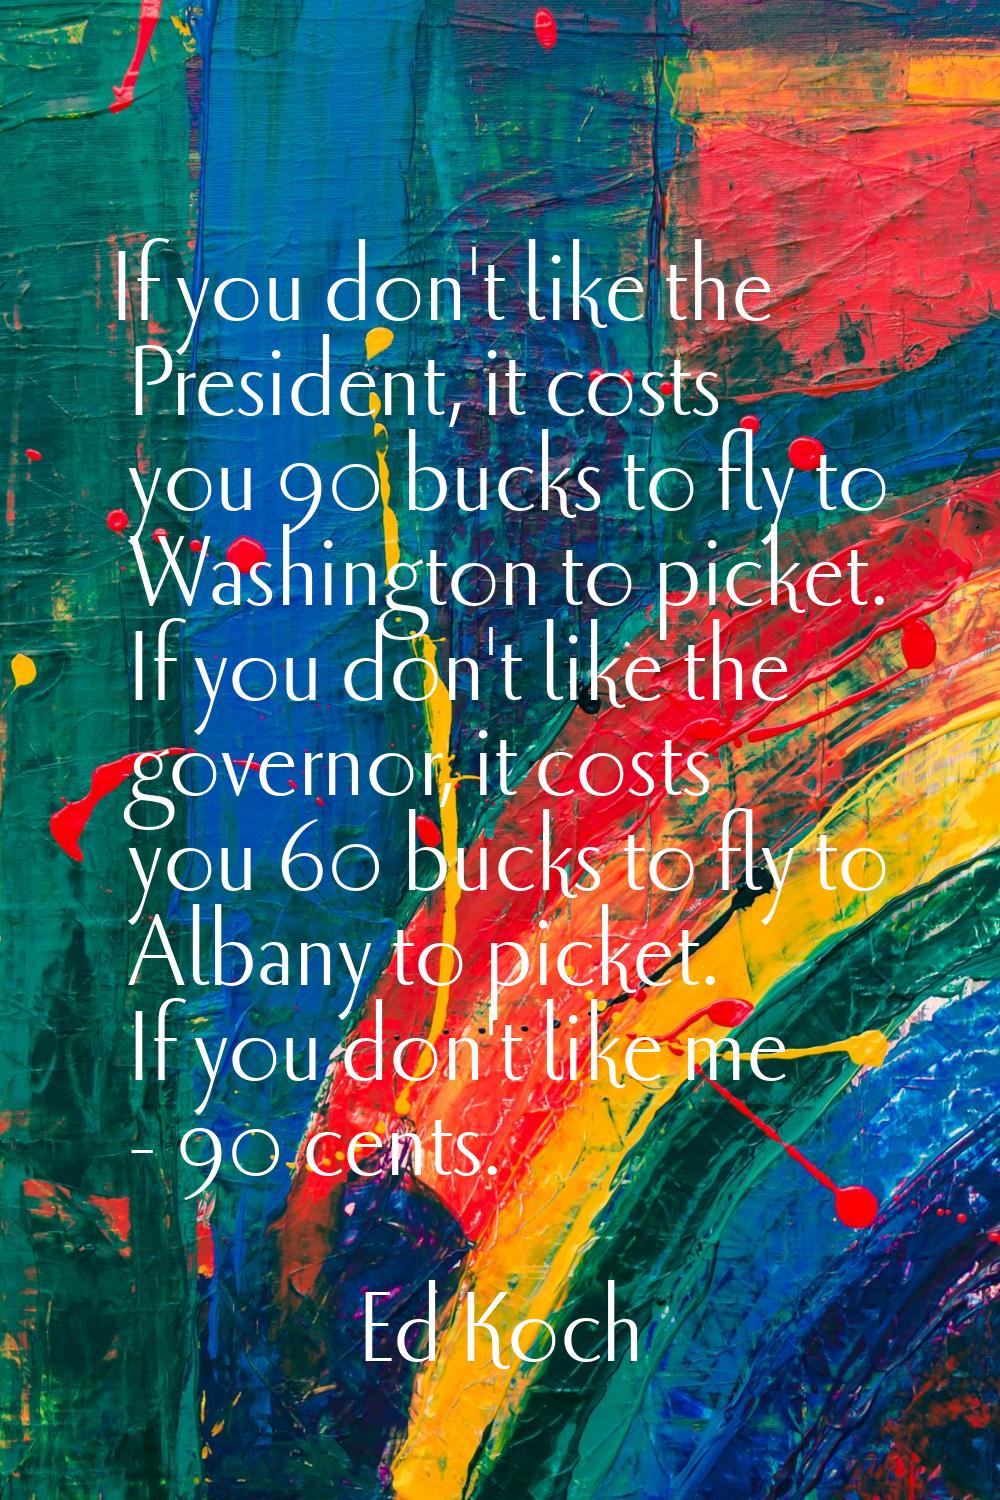 If you don't like the President, it costs you 90 bucks to fly to Washington to picket. If you don't